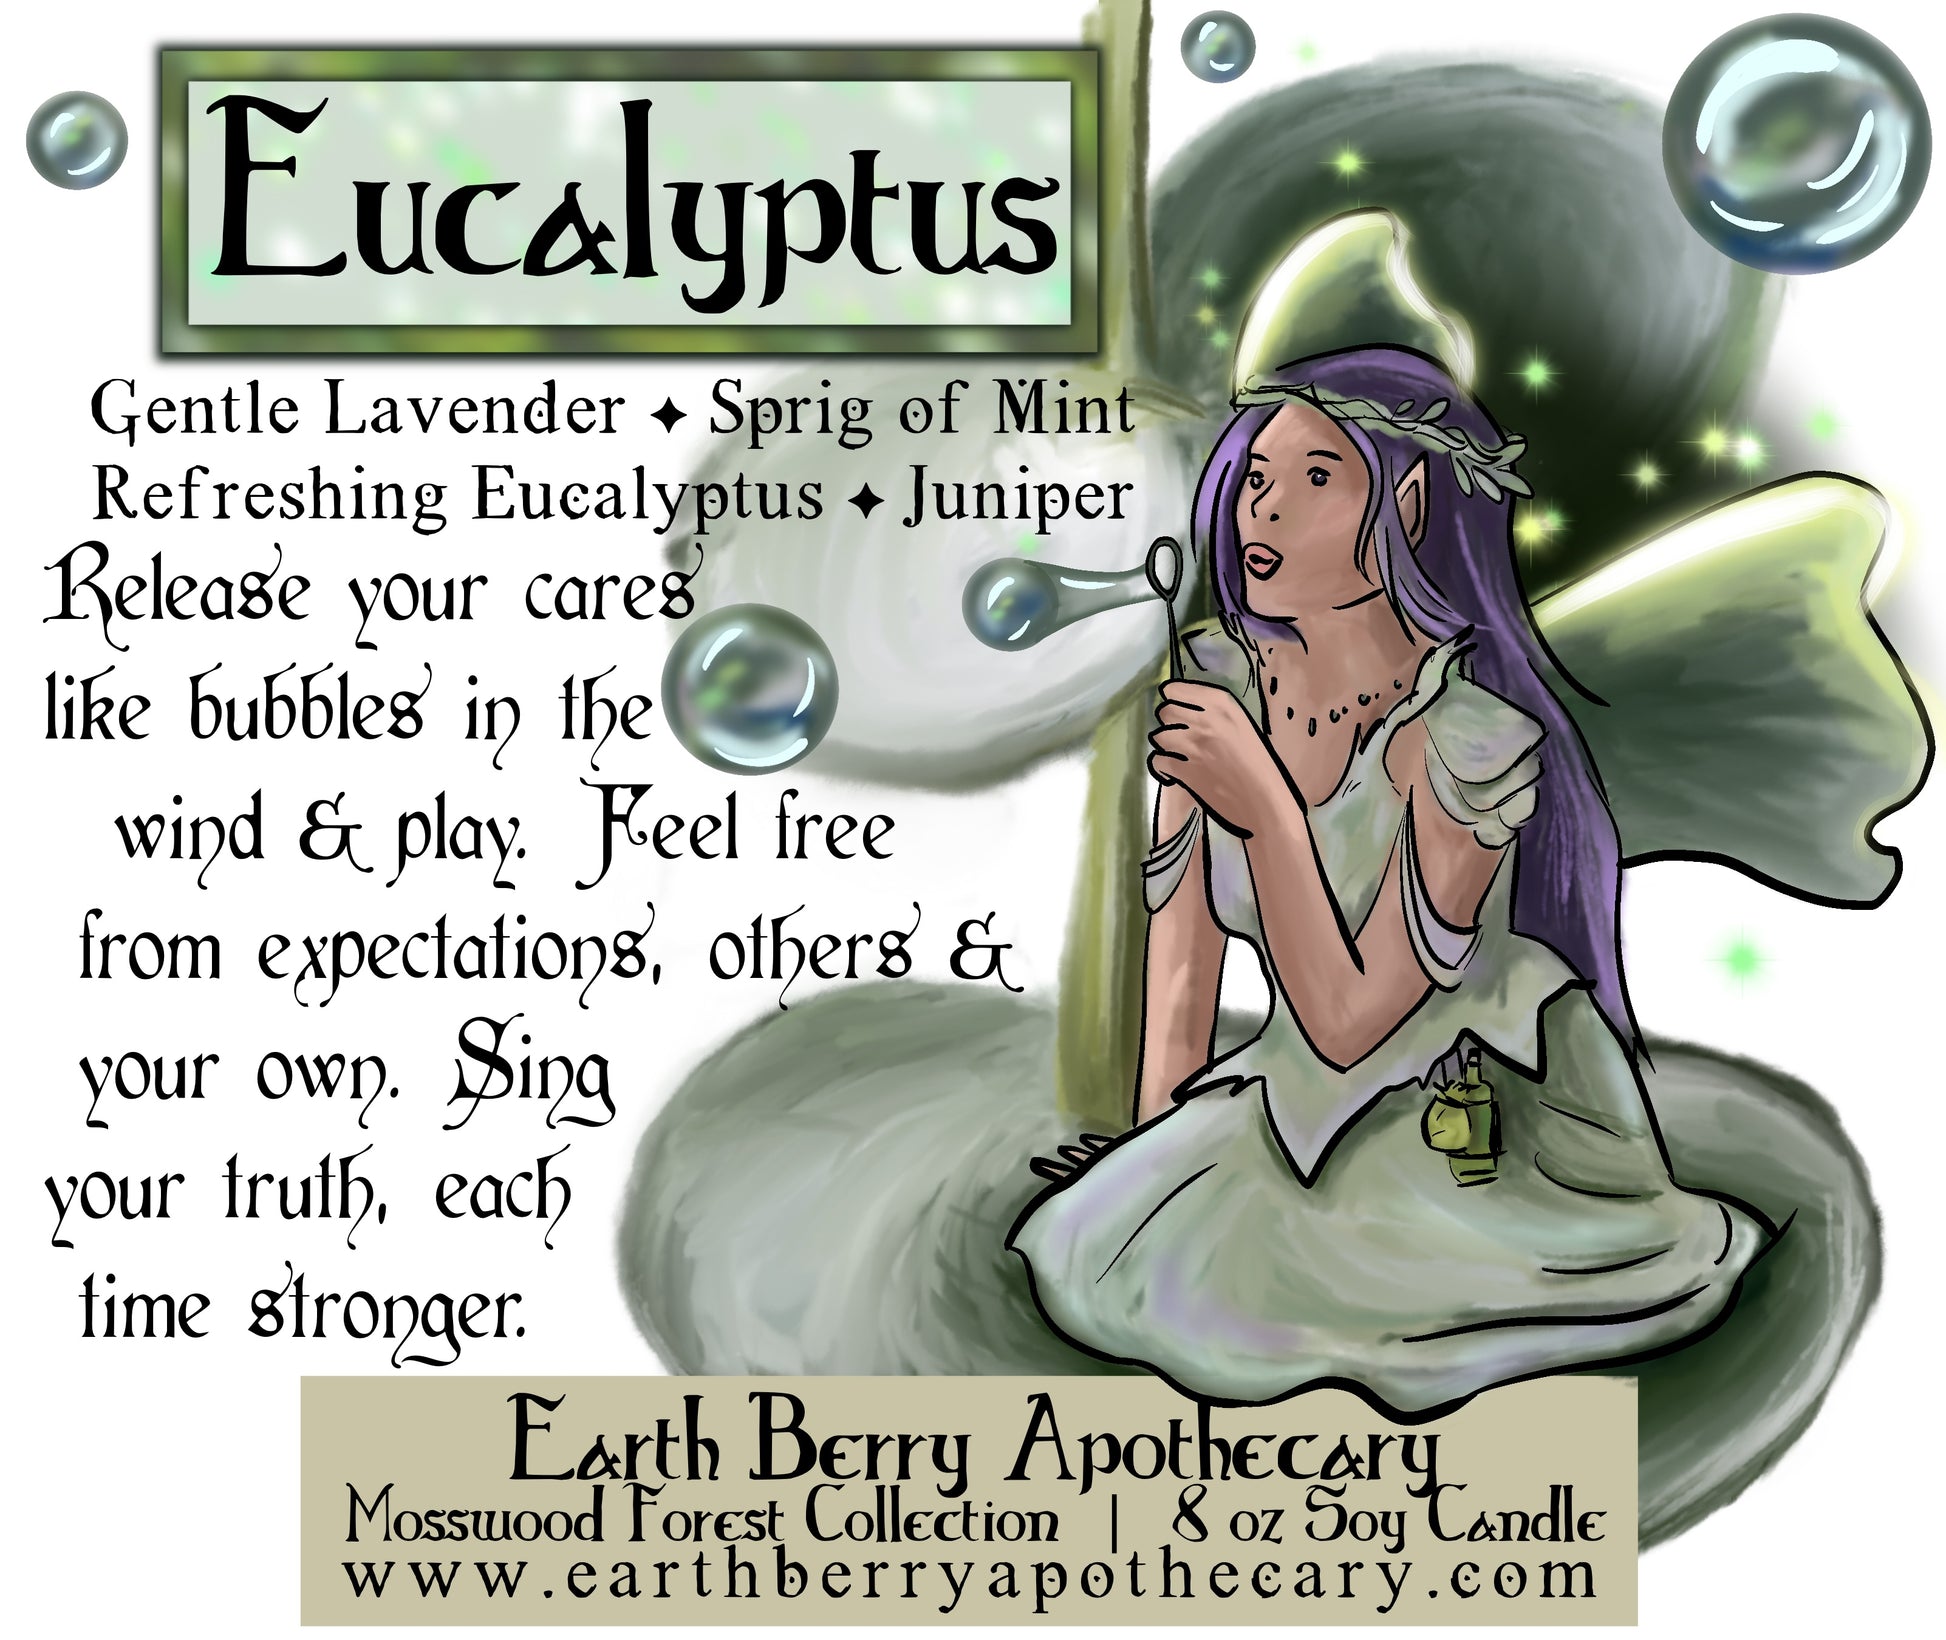 Eucalyptus scented candle with a flower fairy wearing a beautiful green dress blowing bubbles. She has flowers in her long, dark hair.